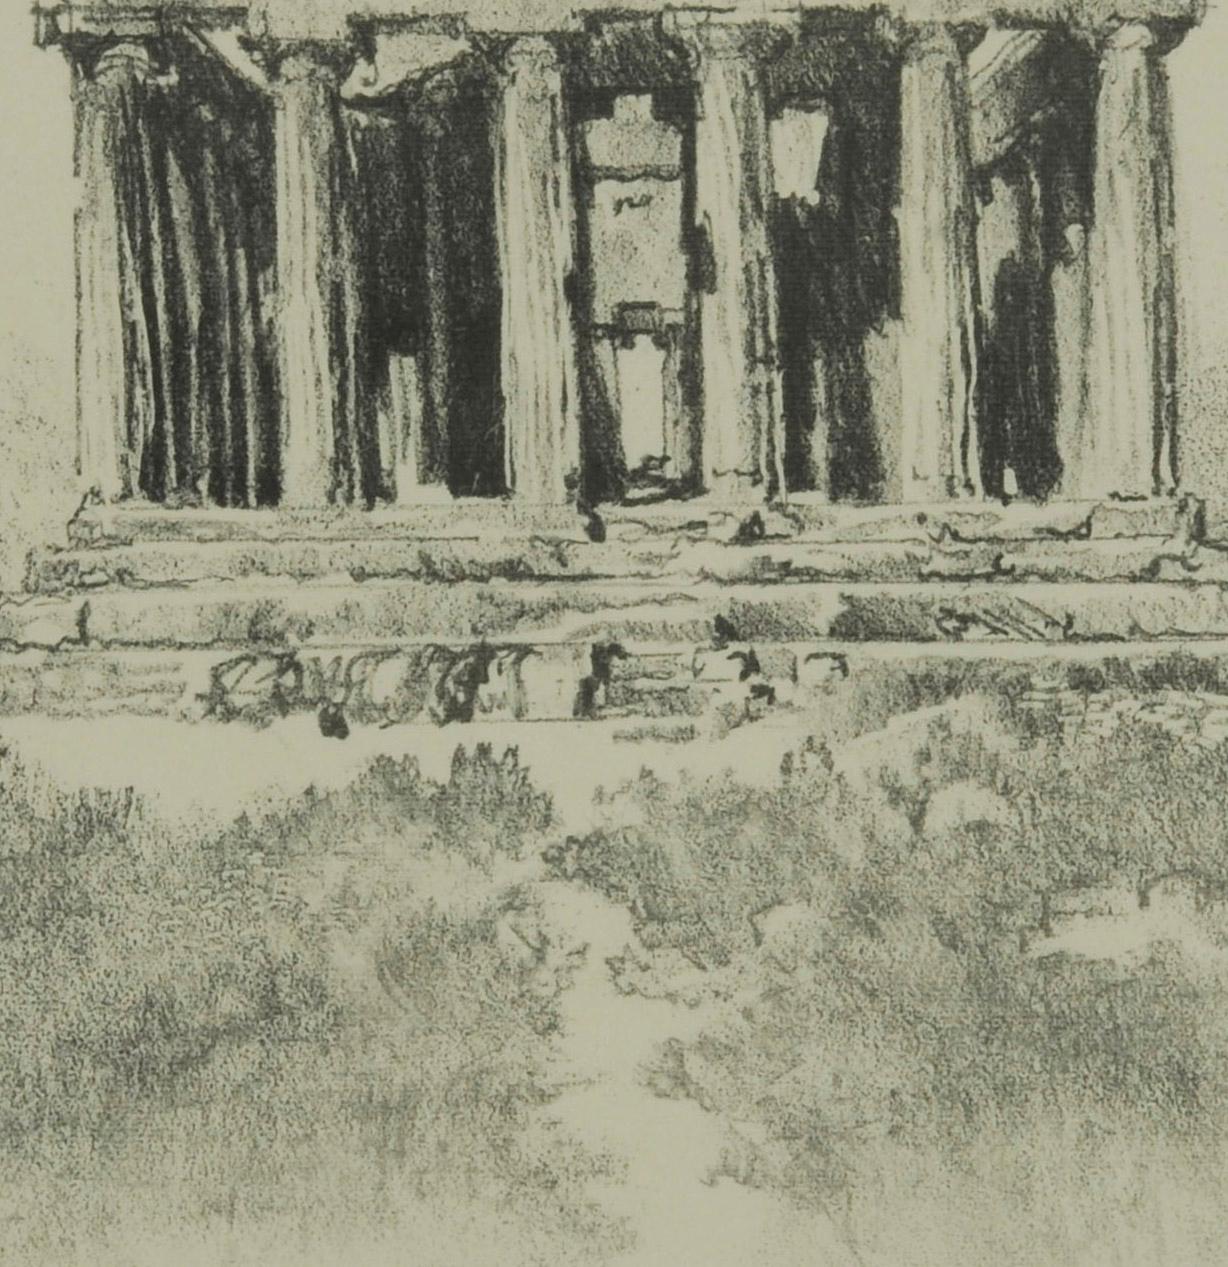 Joseph Pennell (1860-1926)
The Temple by the Sea -- Temple of Concord, Girgenti
Lithograph on Ingres France watermarked paper, 1913
Signed by the artist in pencil right of center
Edition: 50
From the series: The Land of Temples
References: Pennell &